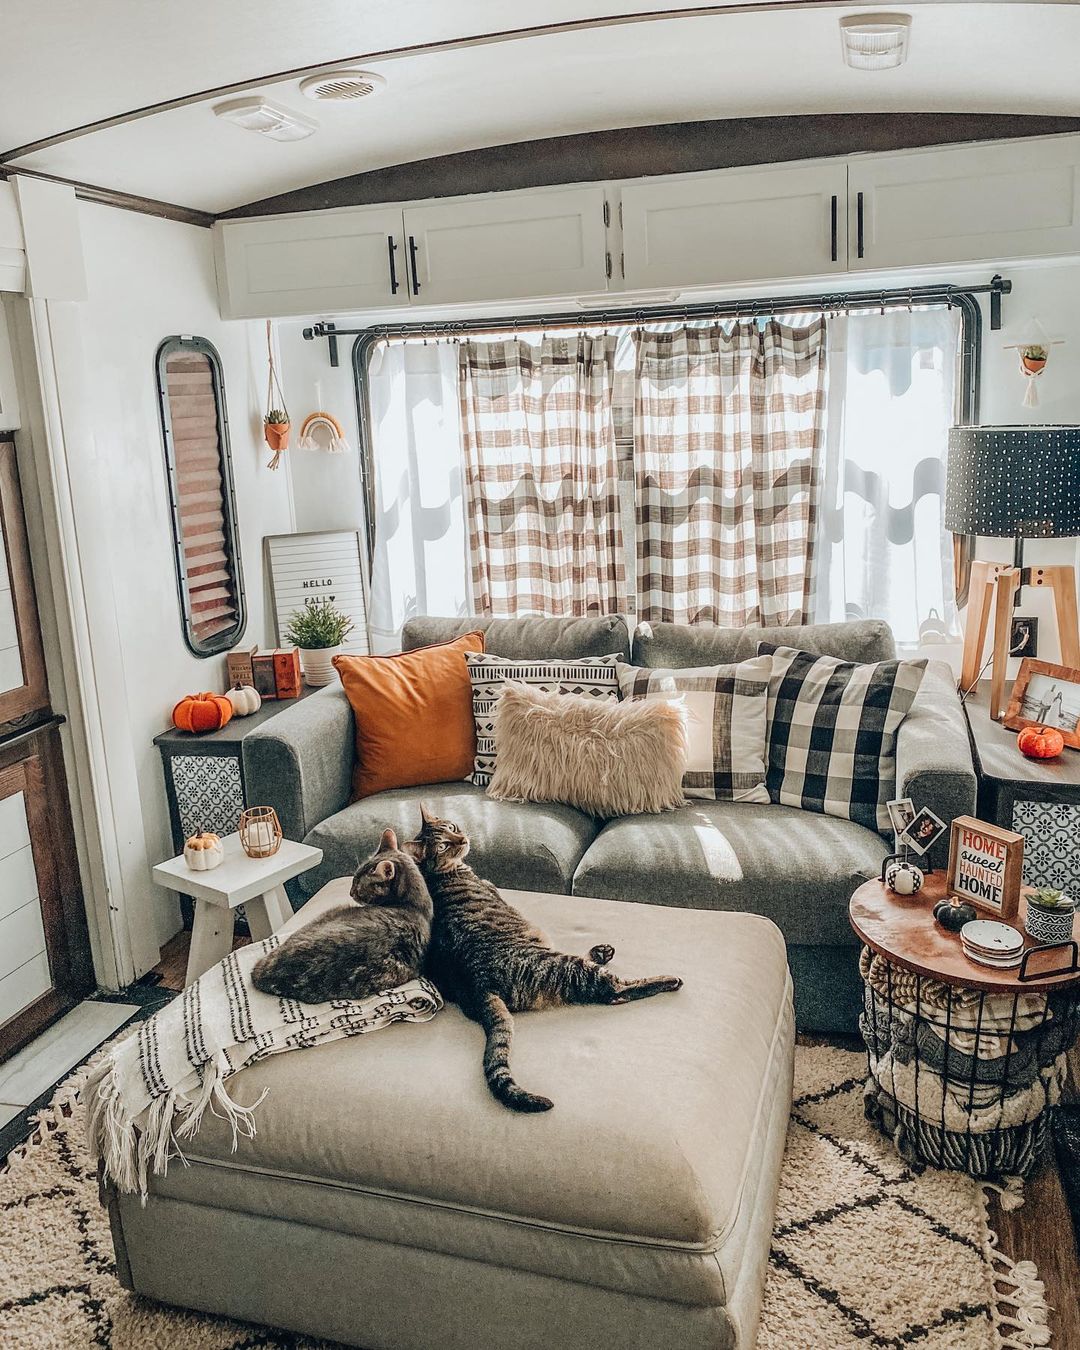 Two Cats Laying on an Ottoman in an Updated RV. Photo by Instagram user @simplecatlady